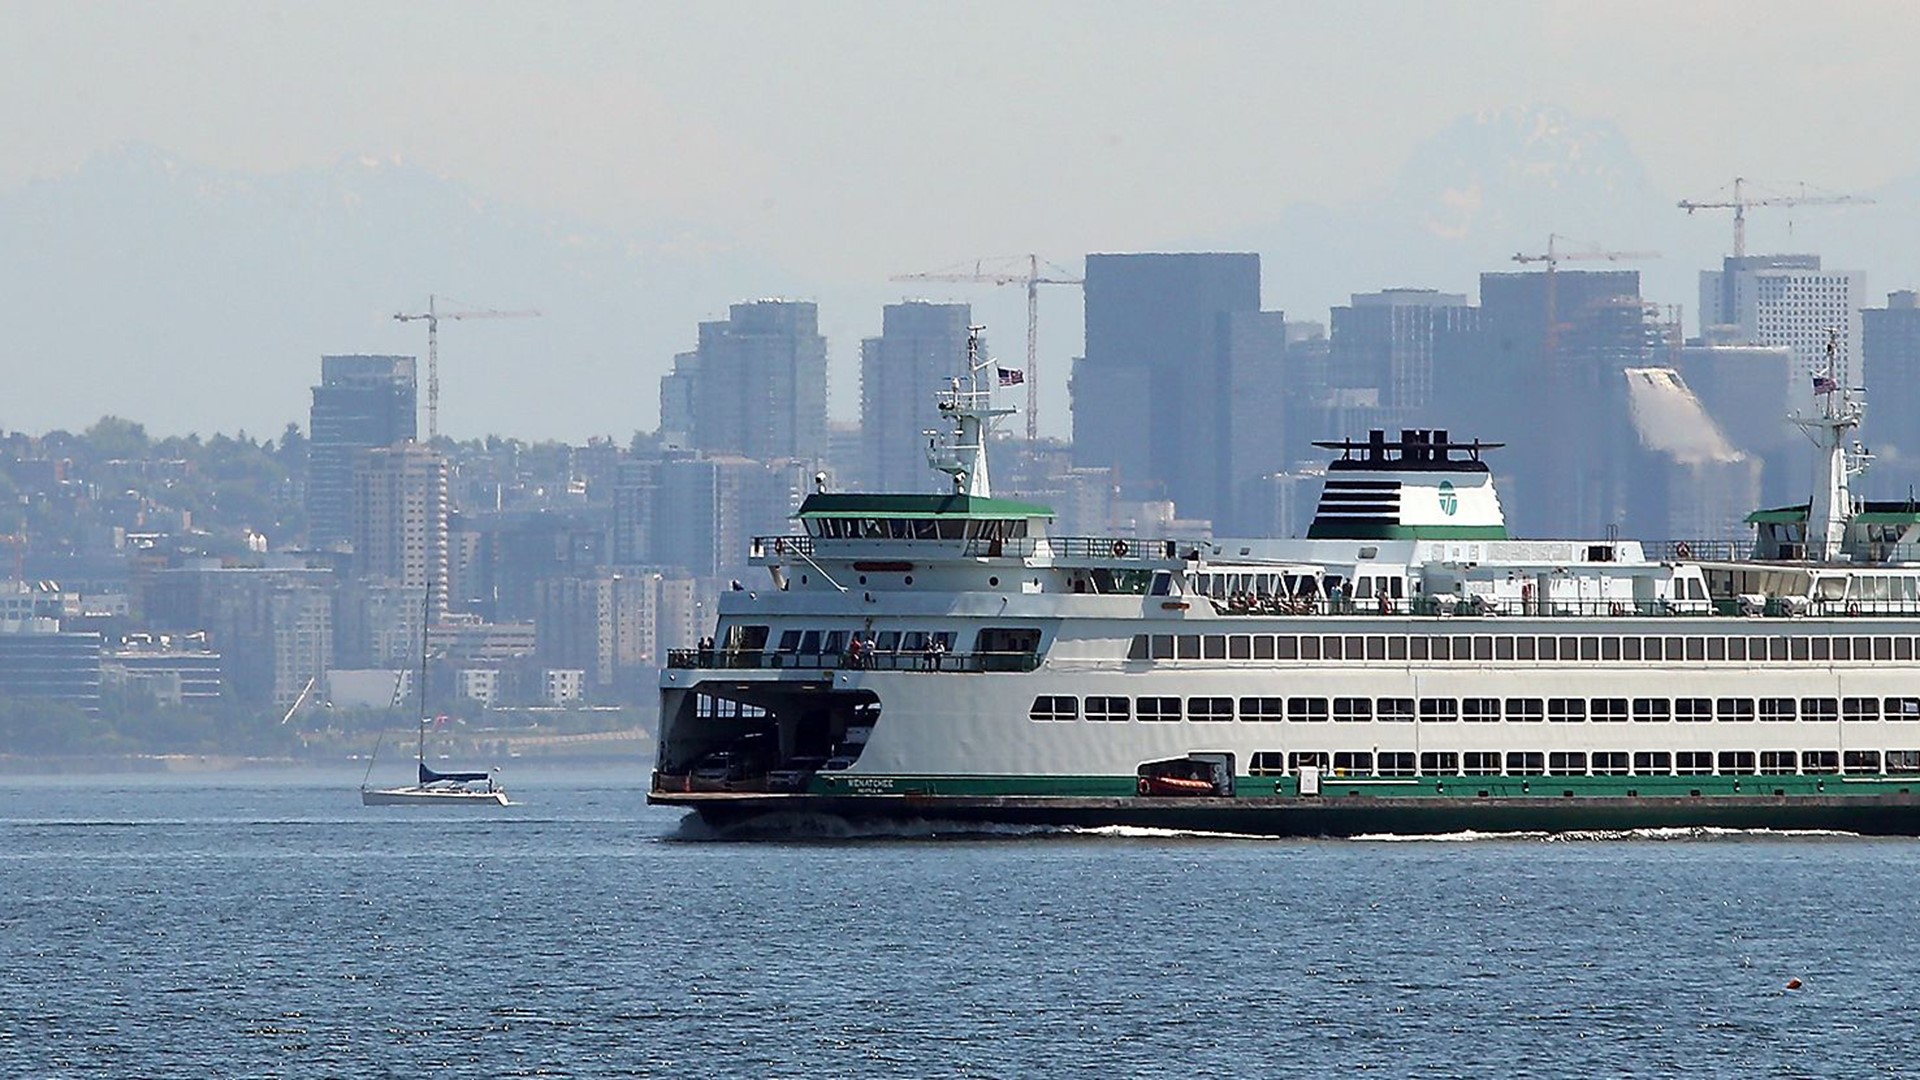 Washington State Ferries’ long-term plan for the next 20 years includes replacing 13 vessels that need to be retired, adding three new boats to increase capacity and fill in during maintenance, and introducing electric-hybrid vessels to the fleet.